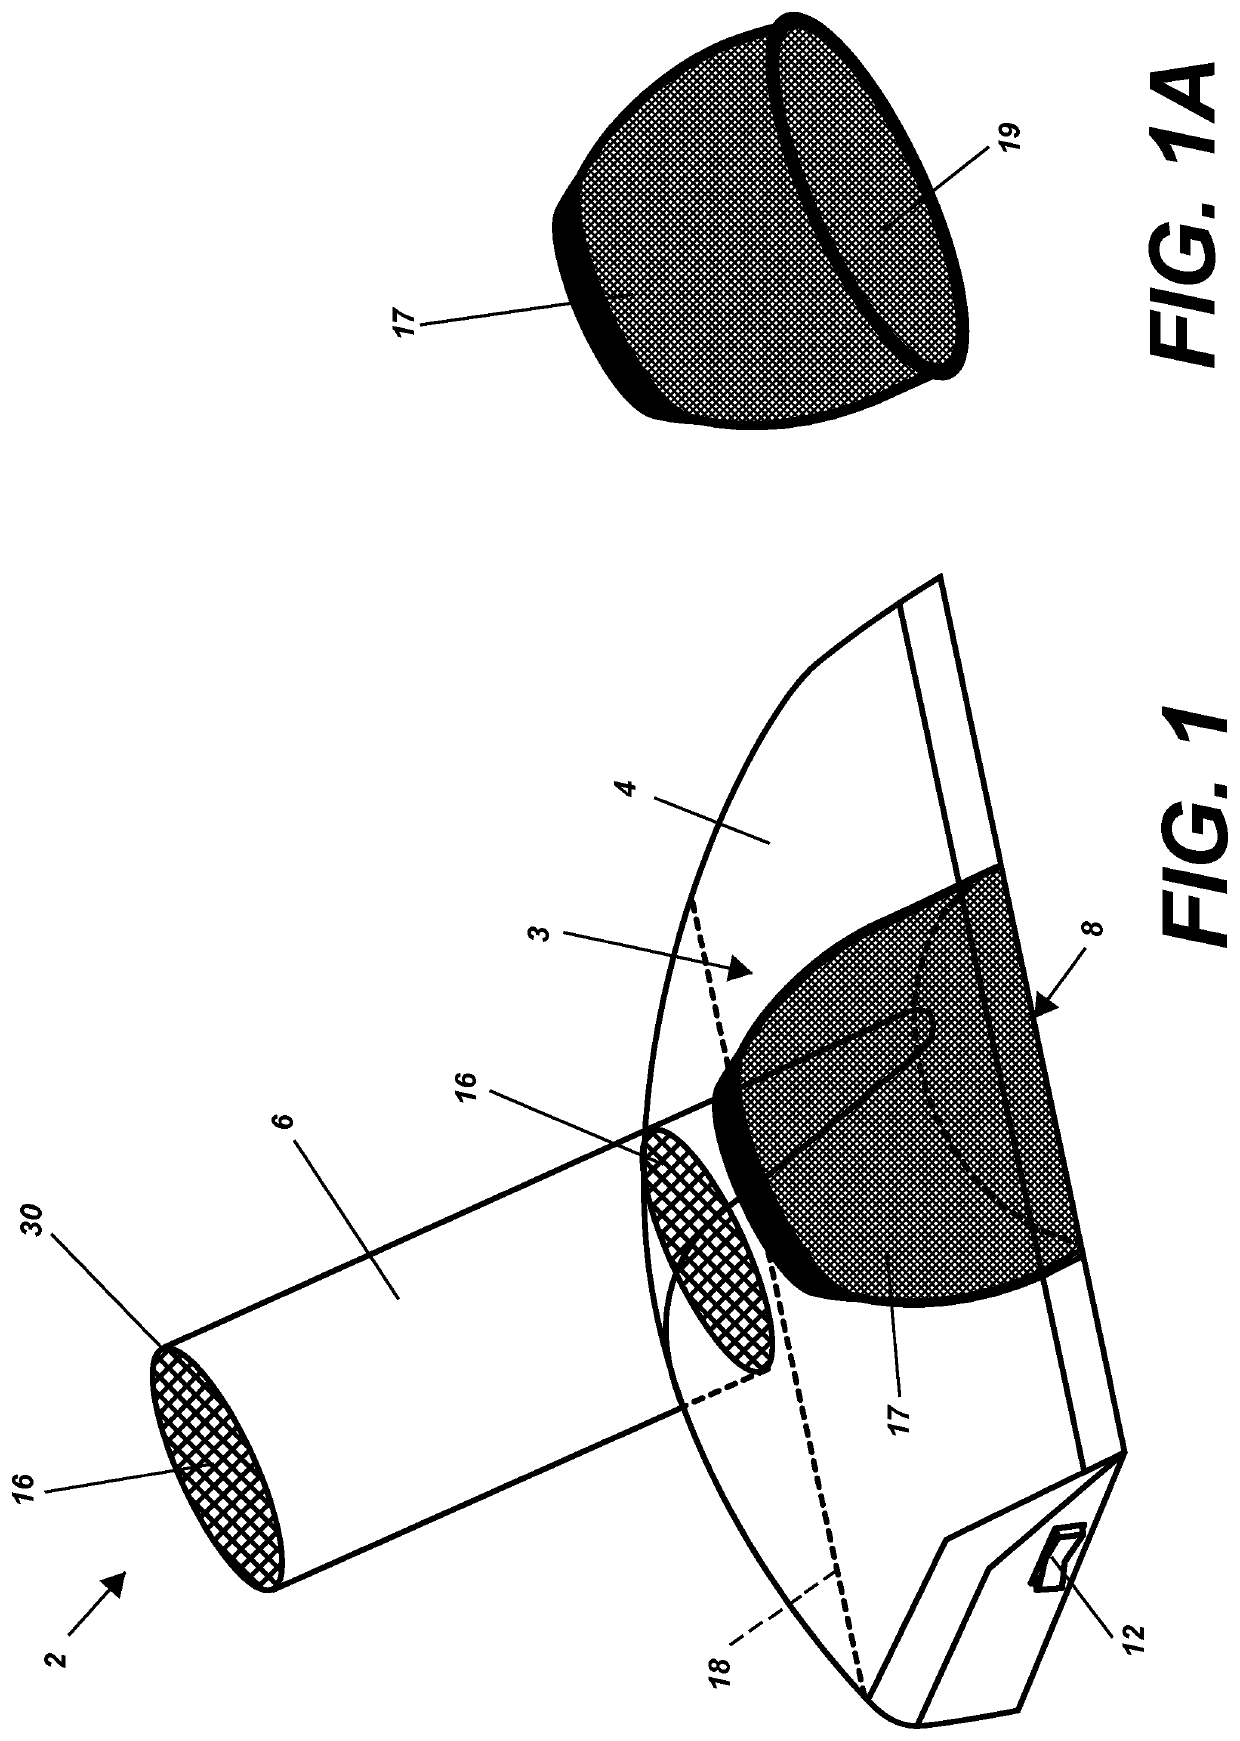 Waste collection attachment for vacuum of leaf blower and method of use